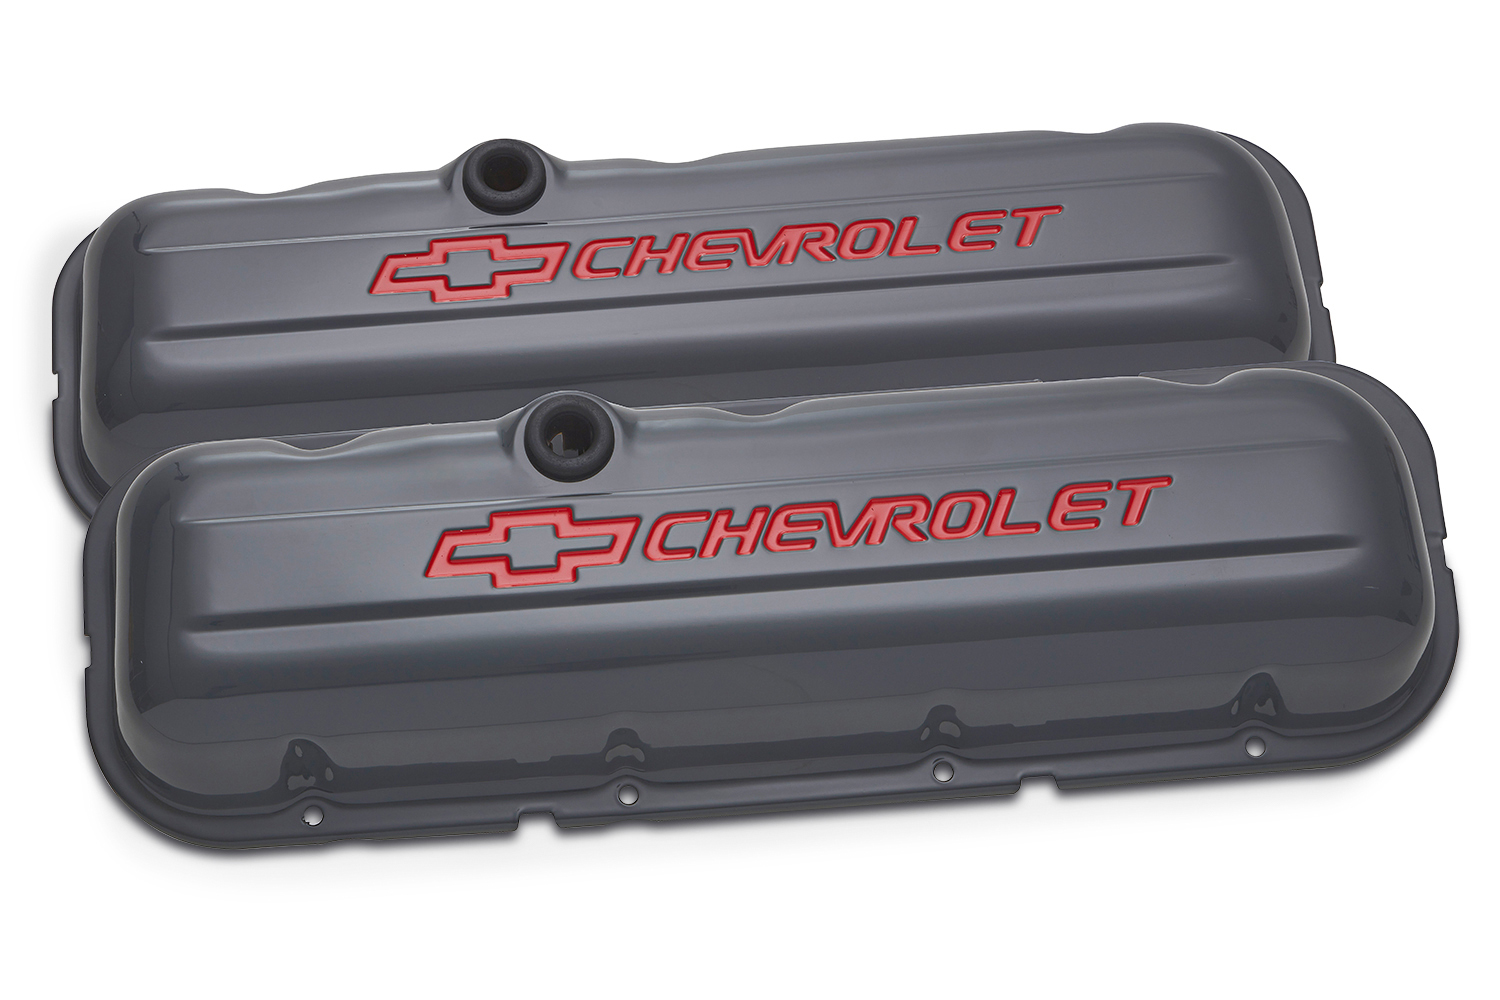 Proform 141-888 Valve Cover, Tall, Baffled, Breather Hole, Chevrolet Bowtie Logo, Steel, Gray Paint, Big Block Chevy, Pair